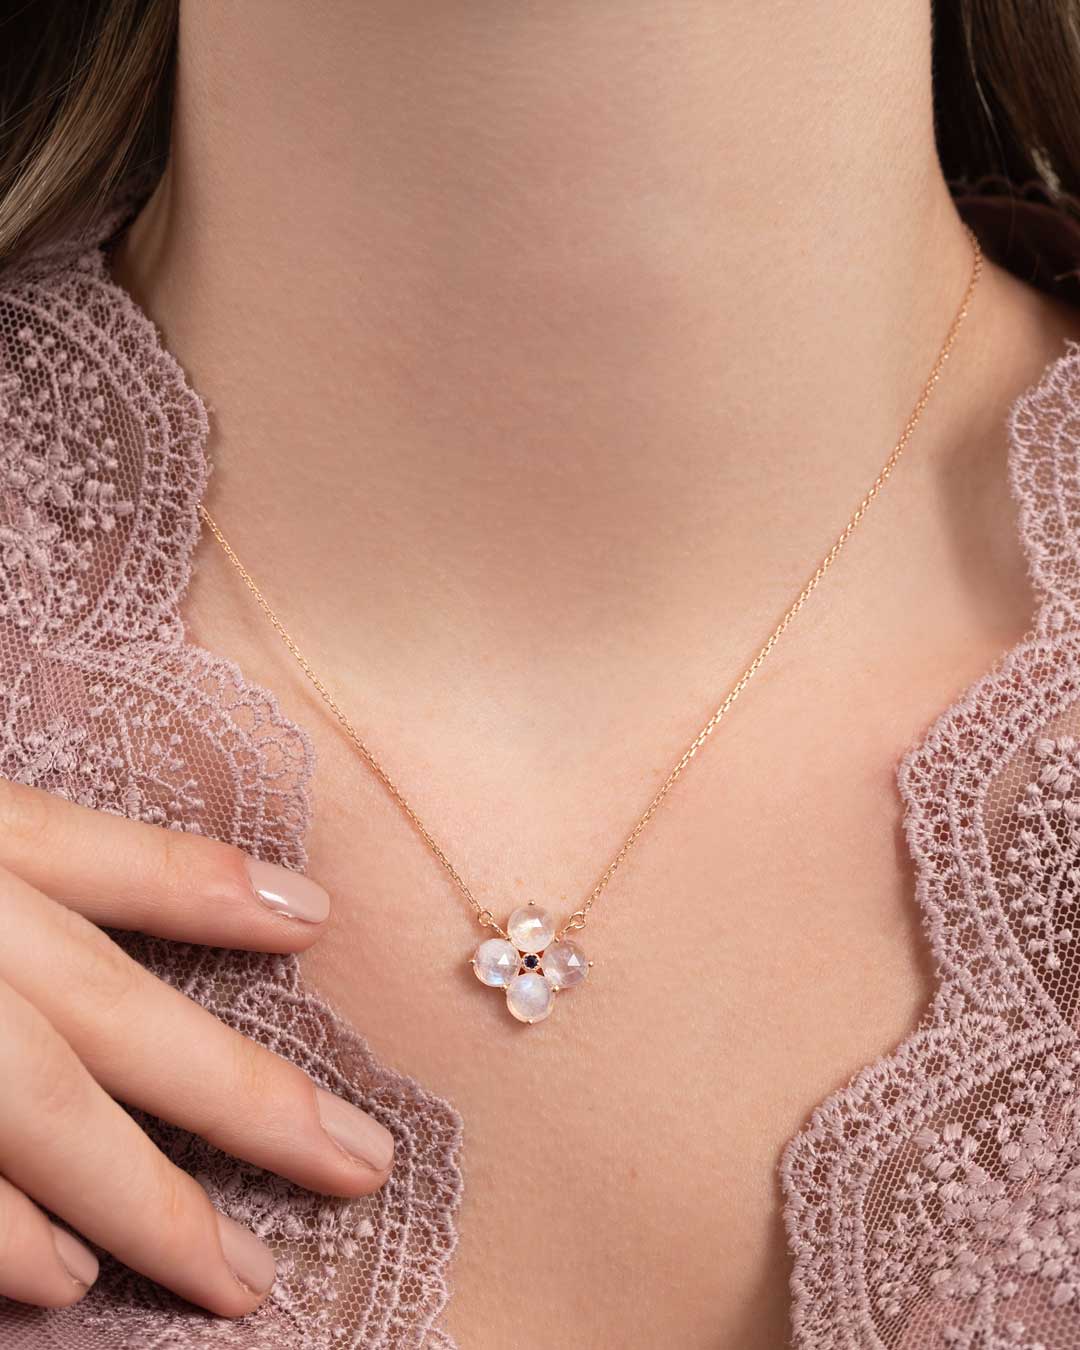 925 ROSE GOLD PLATED MOONSTONE AND IOLITE FLOWER NECKLACE